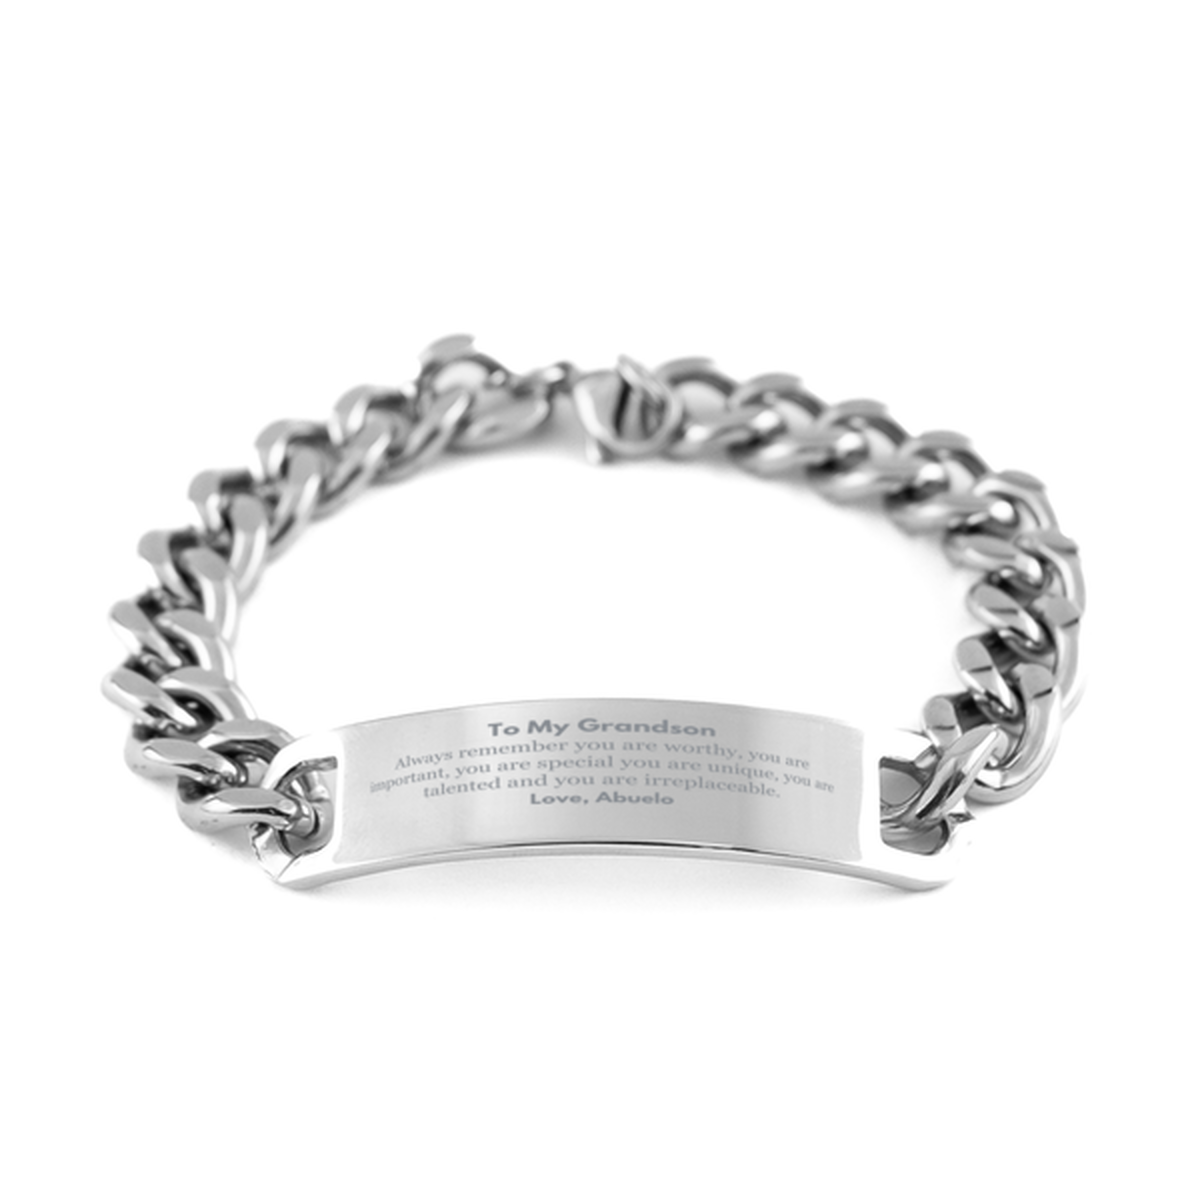 Grandson Birthday Gifts from Abuelo, Inspirational Cuban Chain Stainless Steel Bracelet for Grandson Christmas Graduation Gifts for Grandson Always remember you are worthy, you are important. Love, Abuelo